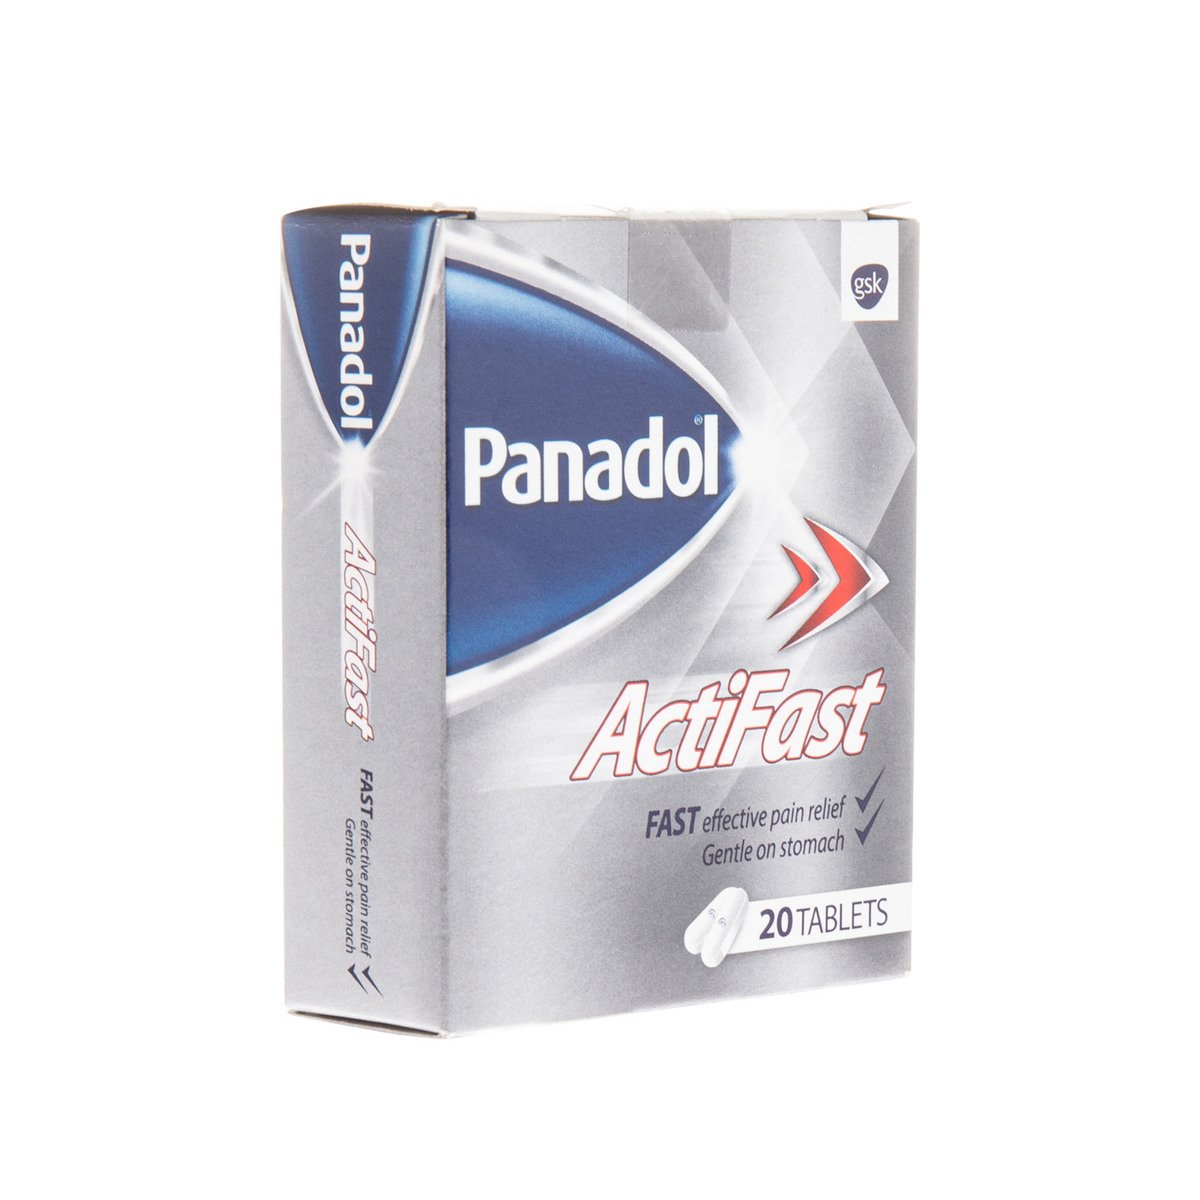 Panadol Actifast Tablets for Fast Pain Relief From Headaches 20 pcs